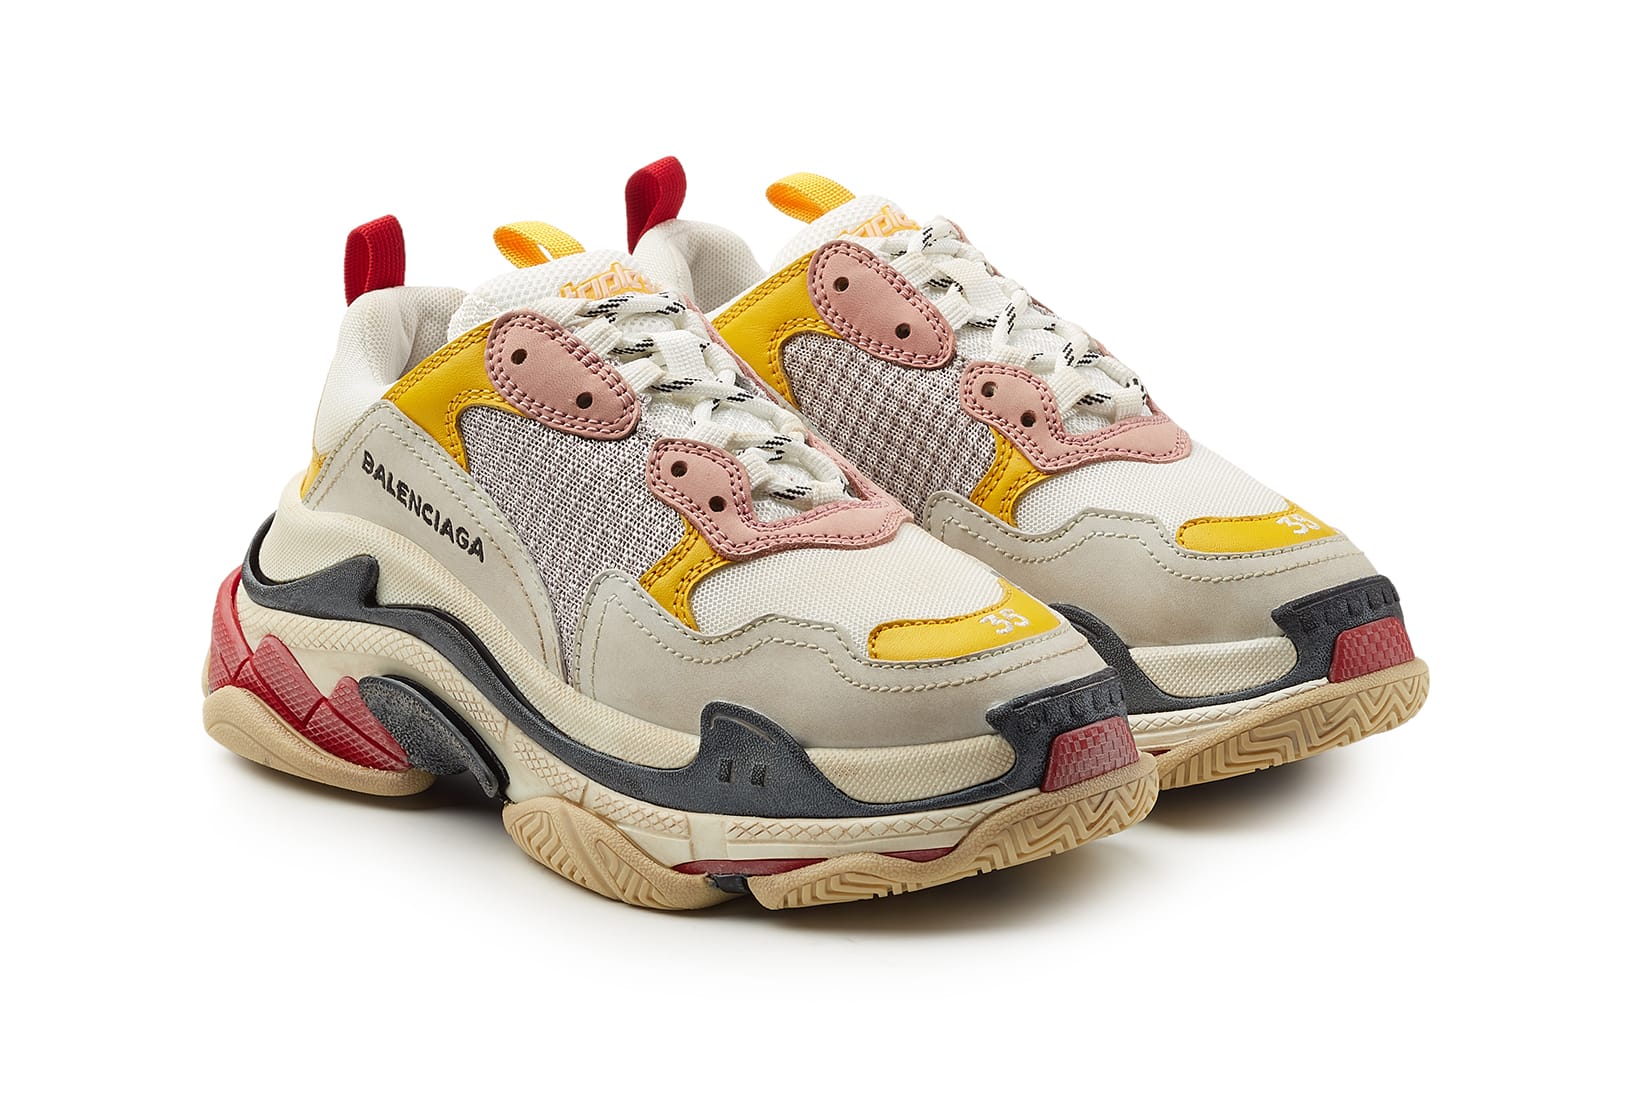 Your size Balenciaga Triple S Trainers Jaune Fluo shoes